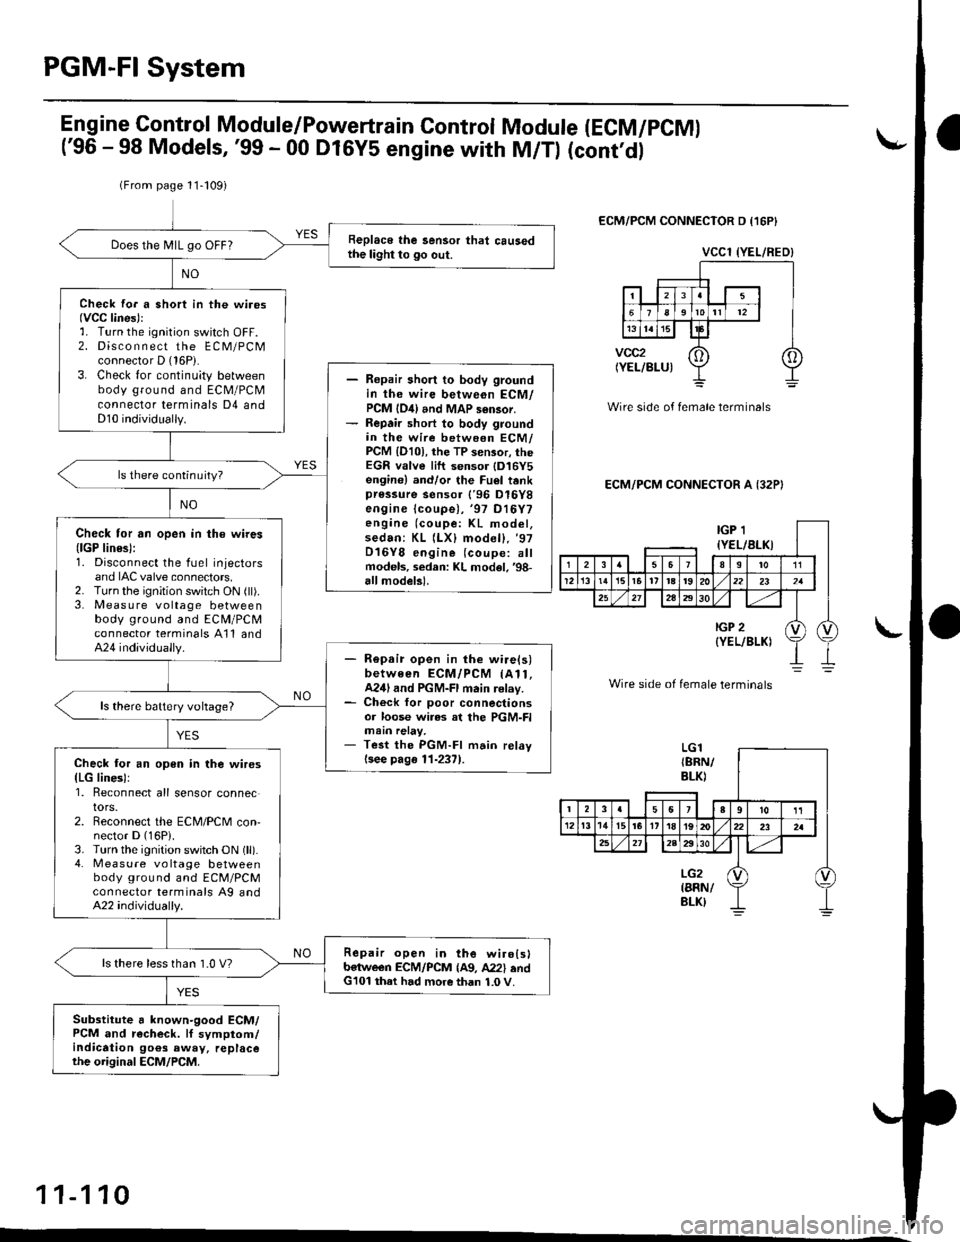 HONDA CIVIC 1996 6.G Repair Manual PGM-FI System
(From page 11-109)
Replace the sensor that causedthe light to go out.Does the N4lL go OFF?
Check fo. a short in the wi.os(VCC lines)::. Turn the ignition switch OFF.2. Disco n n ect the